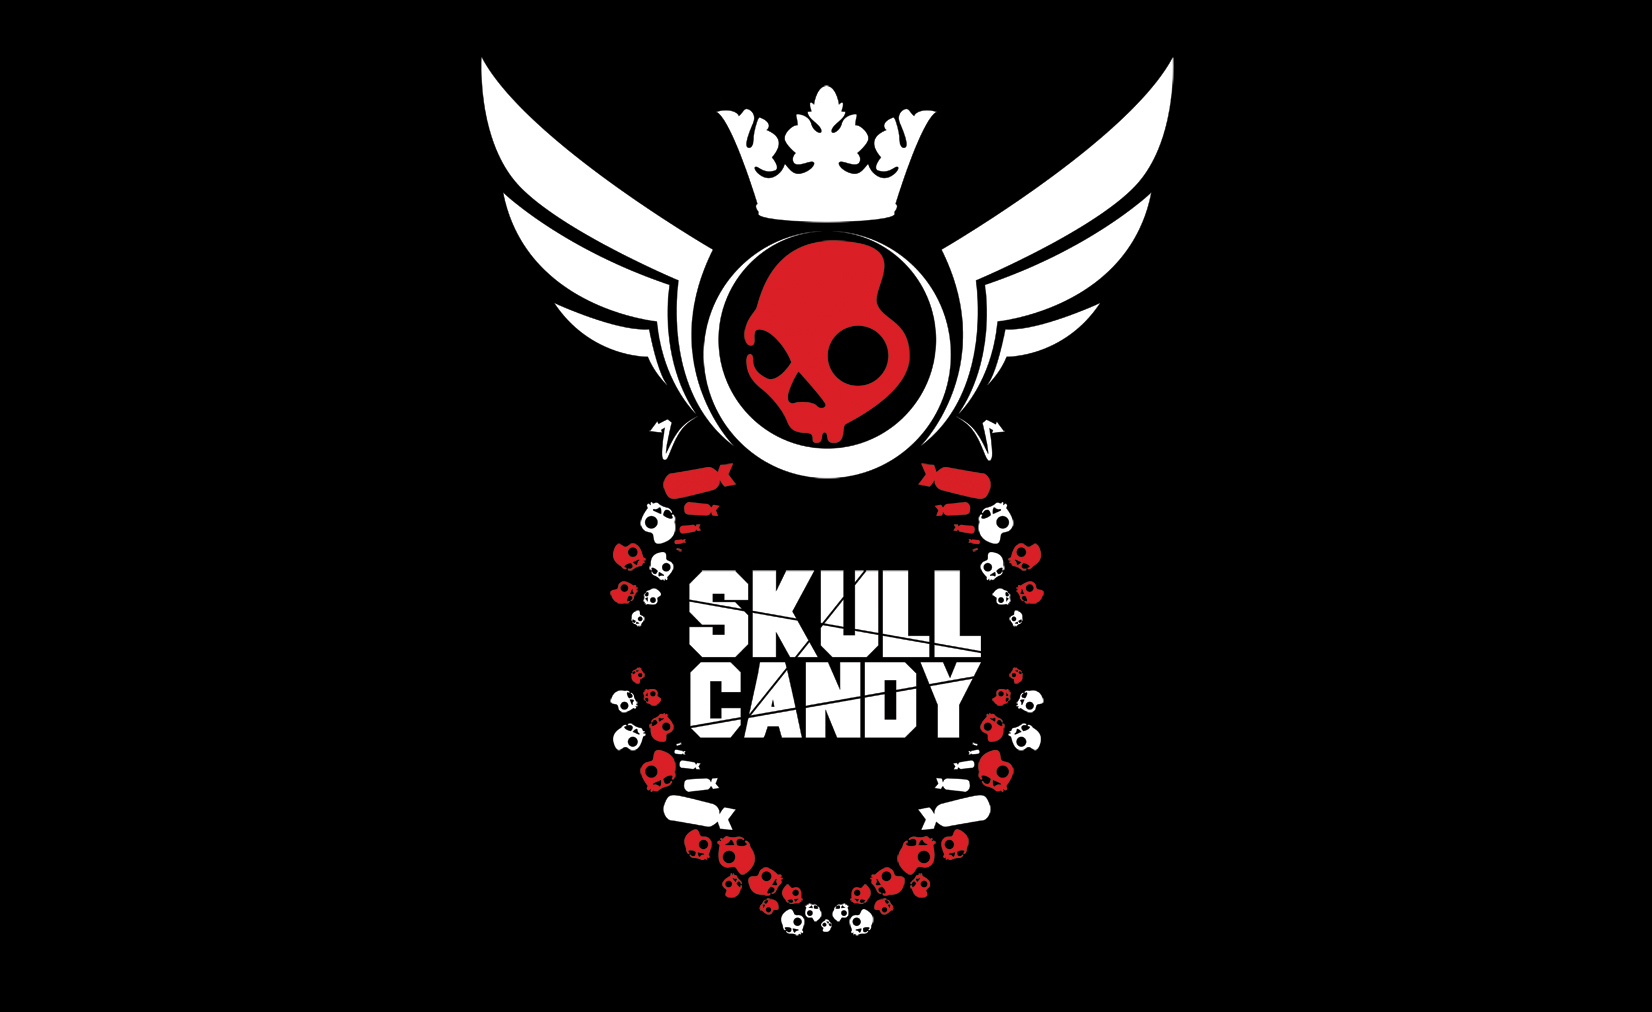 Wallpaper Vector Made This For The Skullcandy